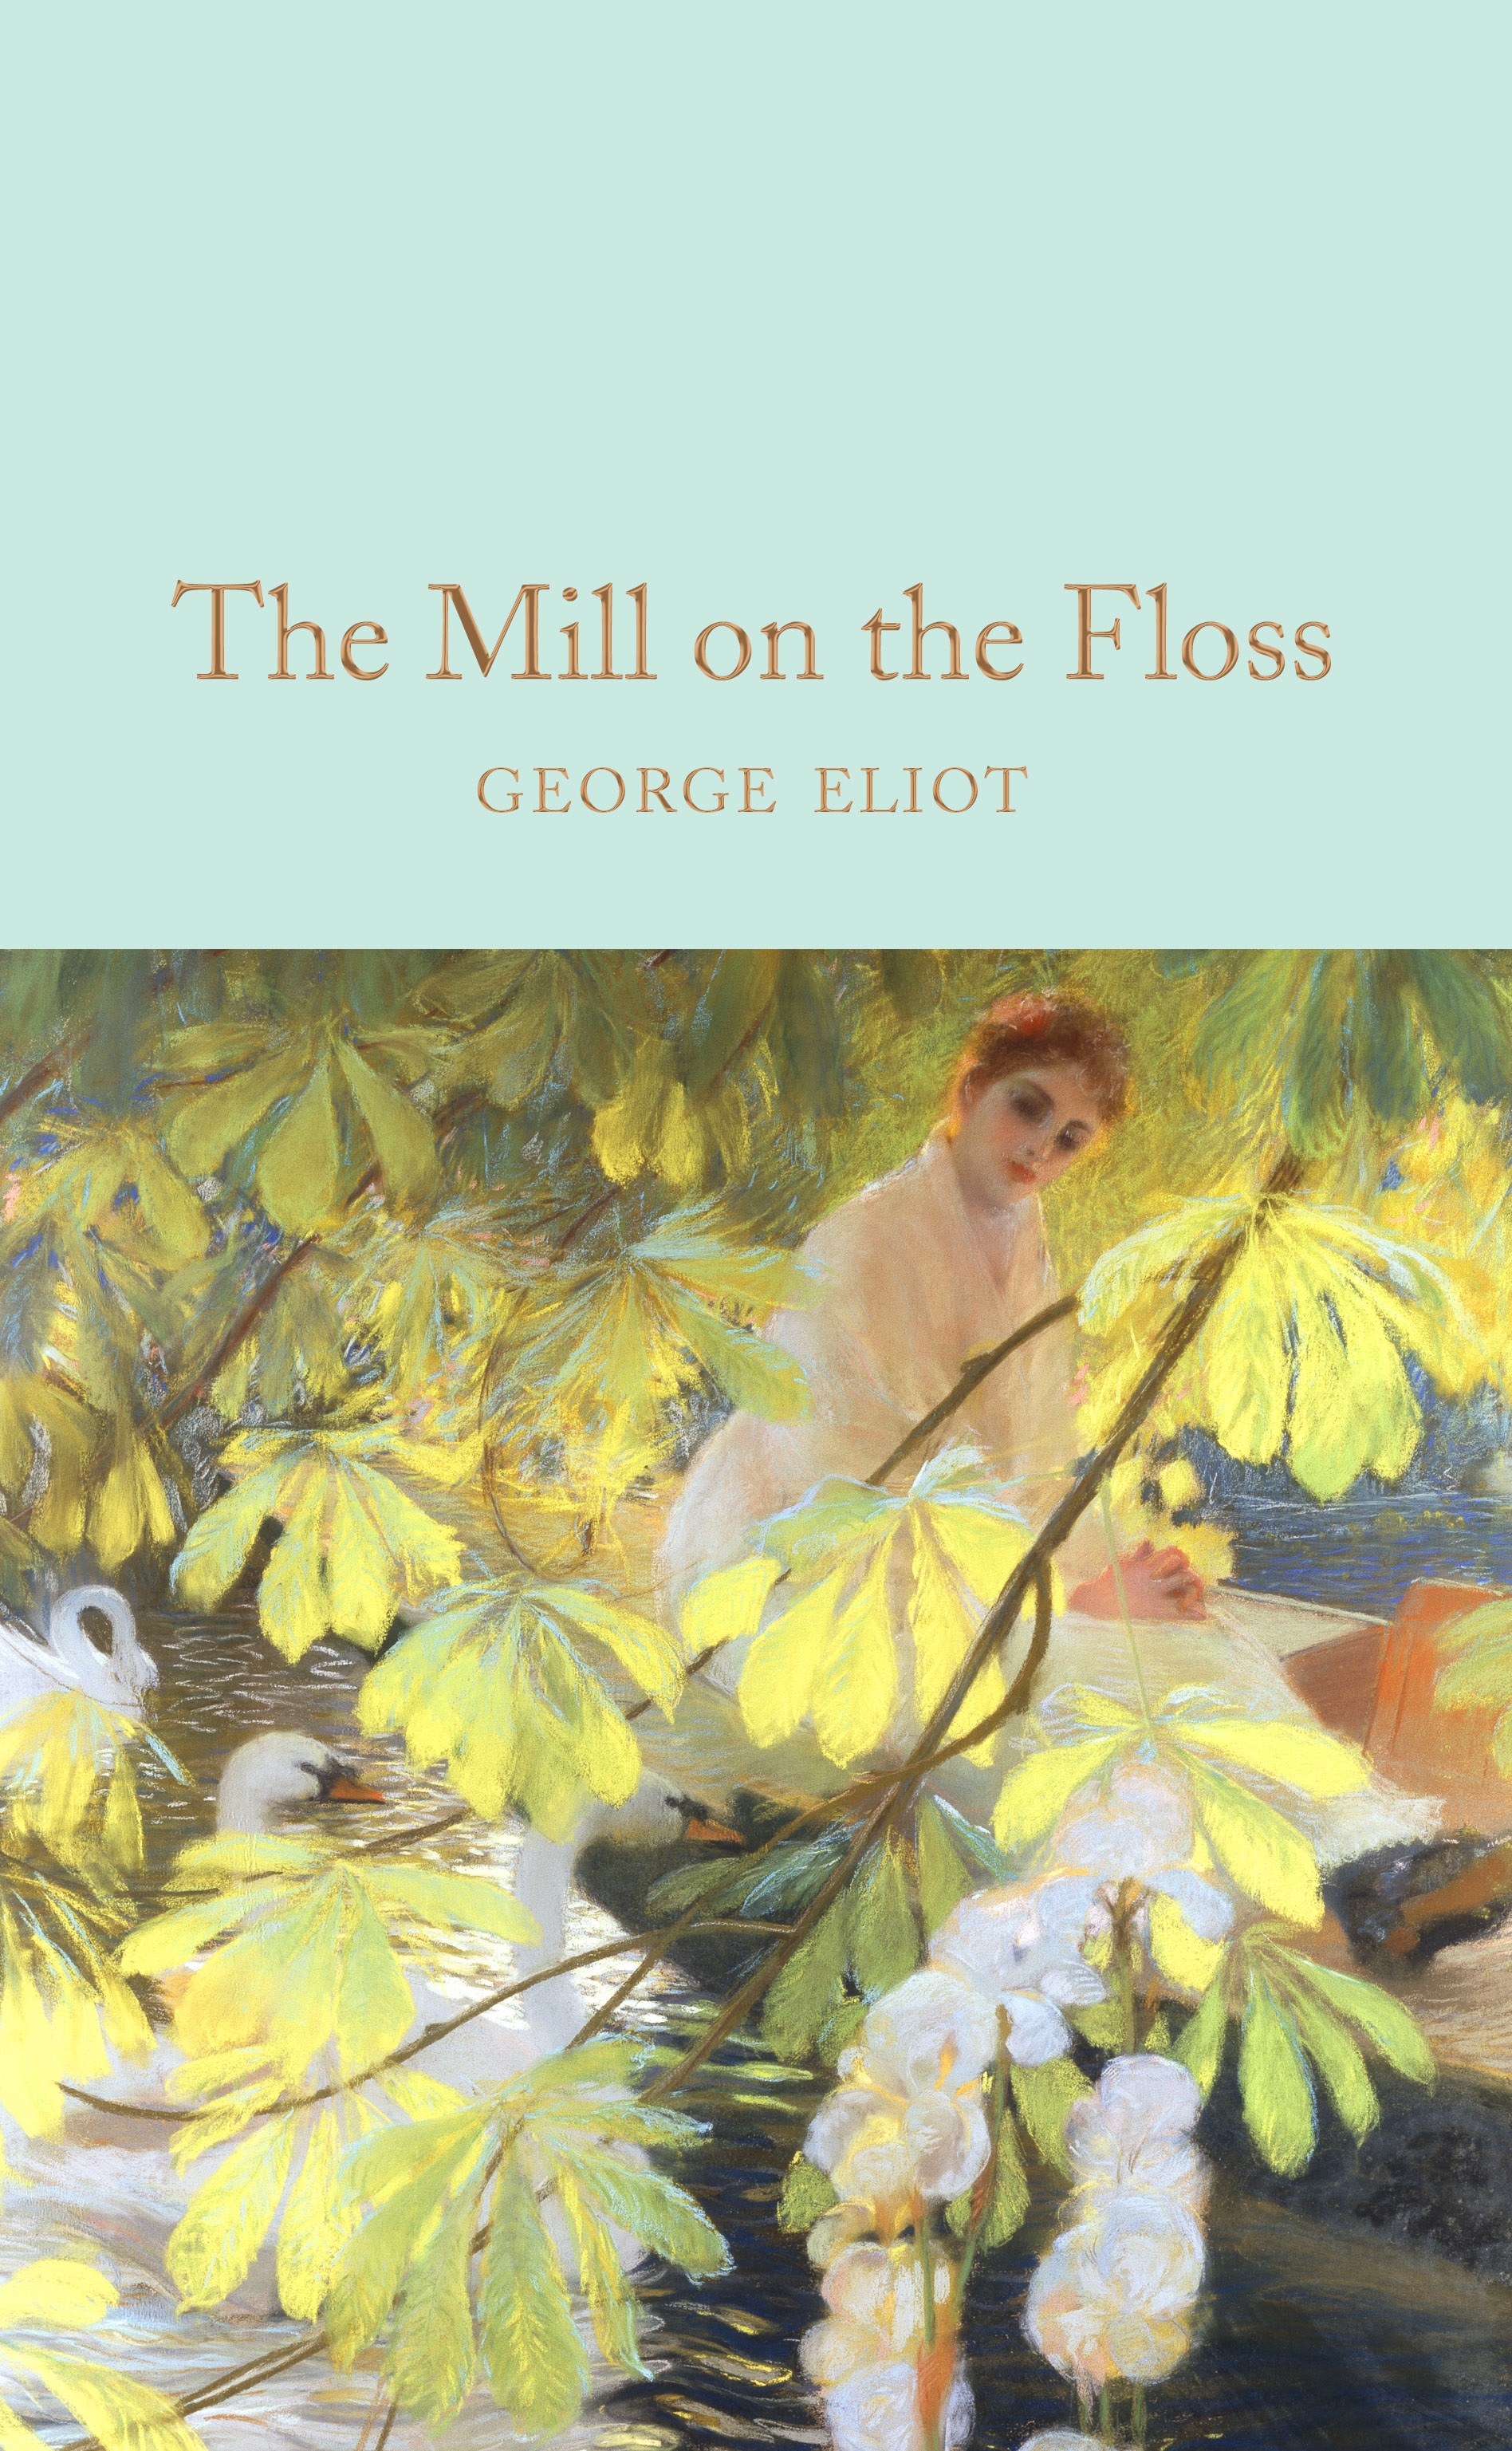 Book “The Mill on the Floss” by George Eliot — May 7, 2019